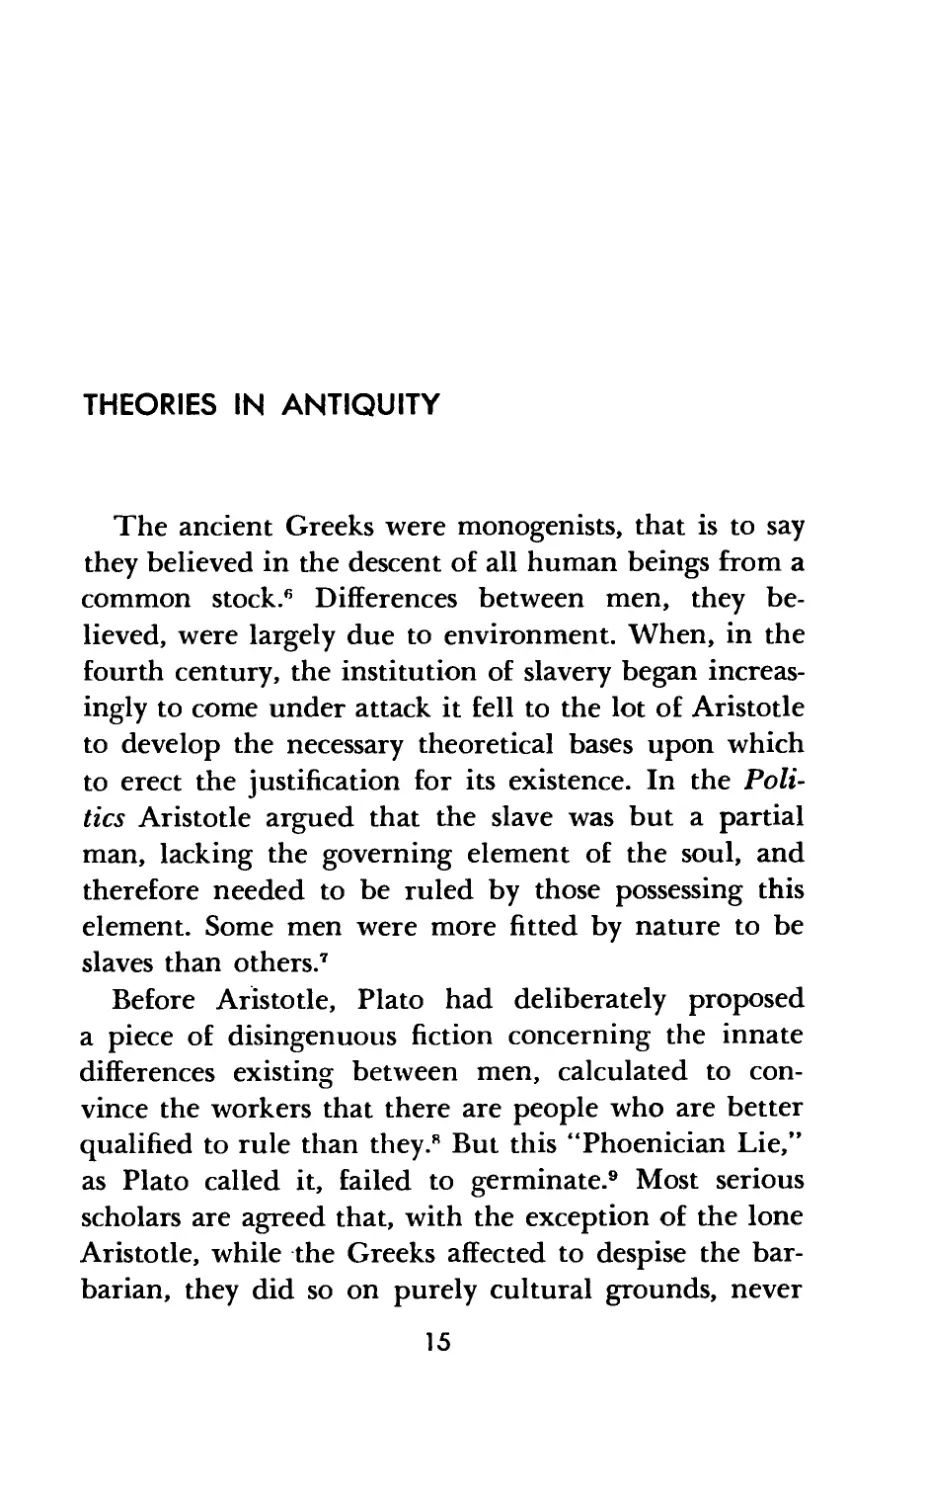 Theories in Antiquity